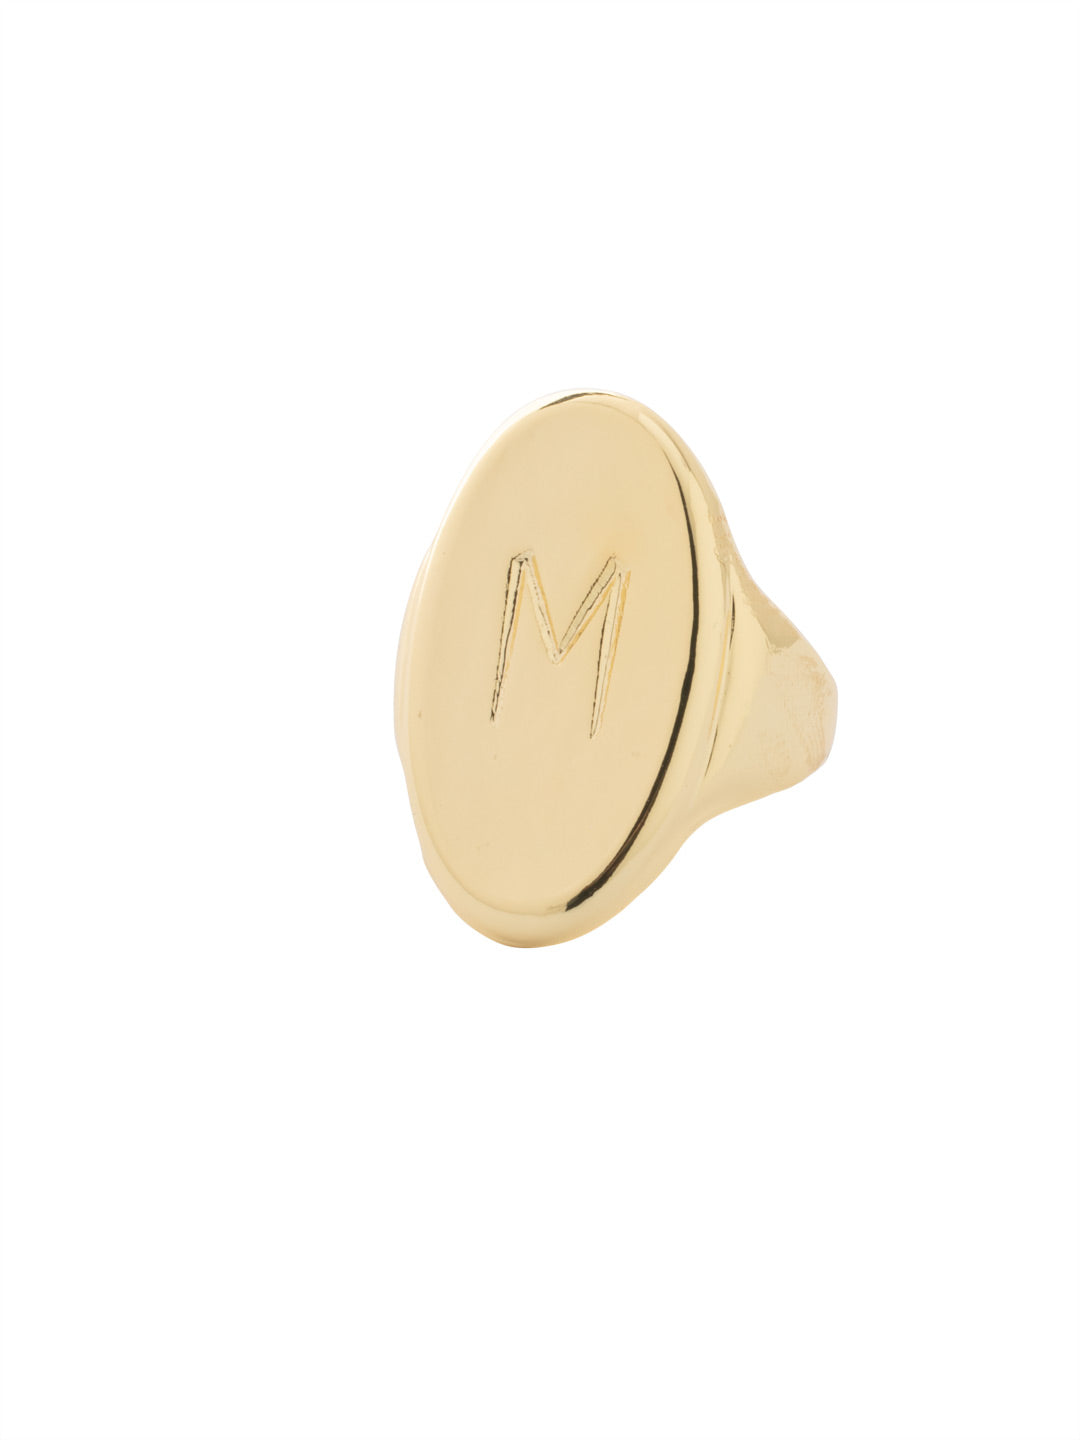 Product Image: "M" Signet Statement Ring